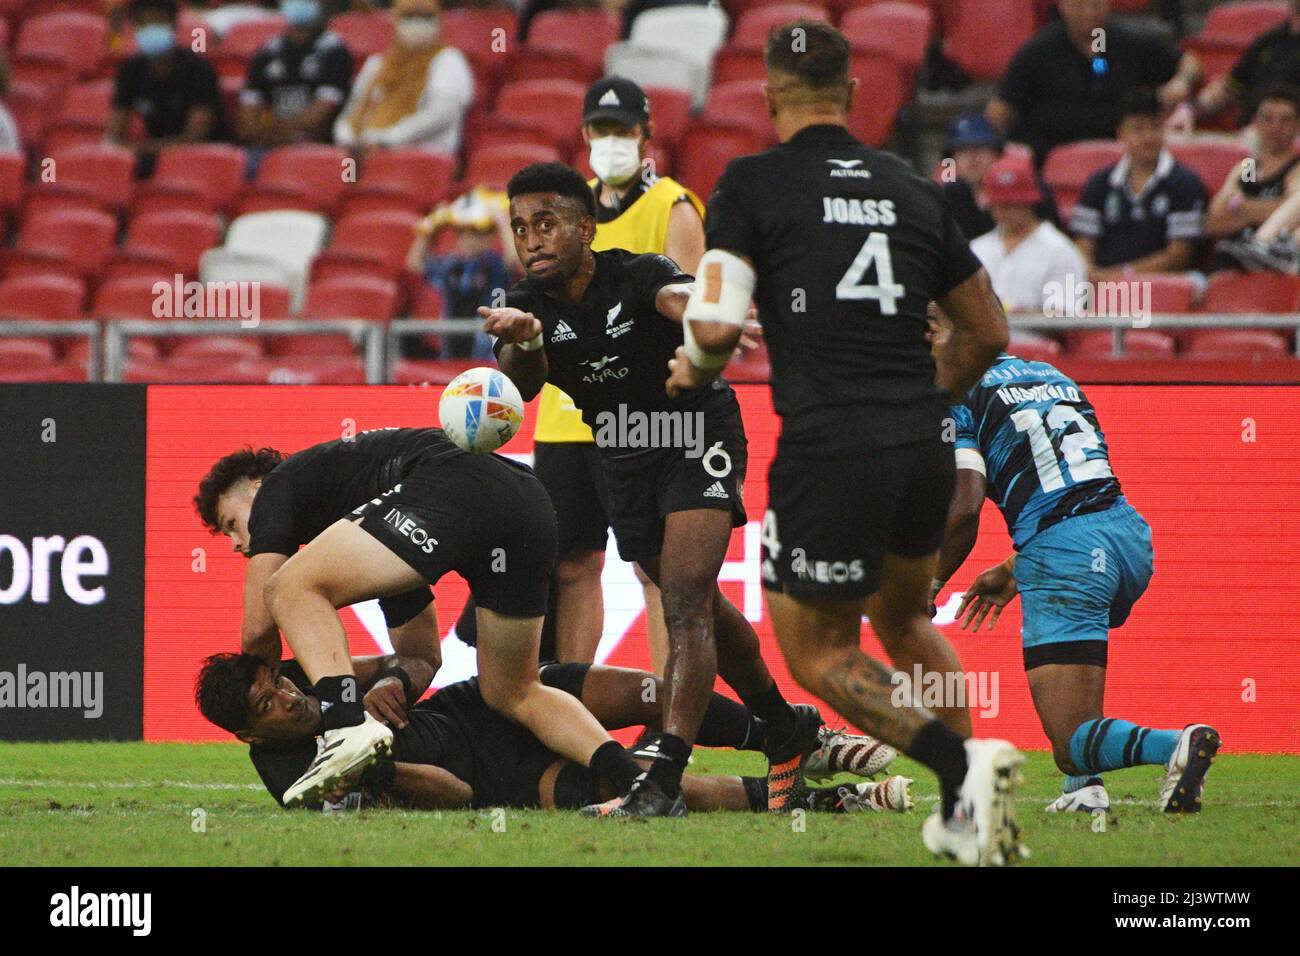 Singapore. 10th Apr, 2022. Akuila Rokolisoa (C) of New Zealand competes during the final between New Zealand and Fiji at the HSBC World Rugby Sevens Singapore stop, held in the National Stadium on April 10, 2022. Credit: Then Chih Wey/Xinhua/Alamy Live News Stock Photo